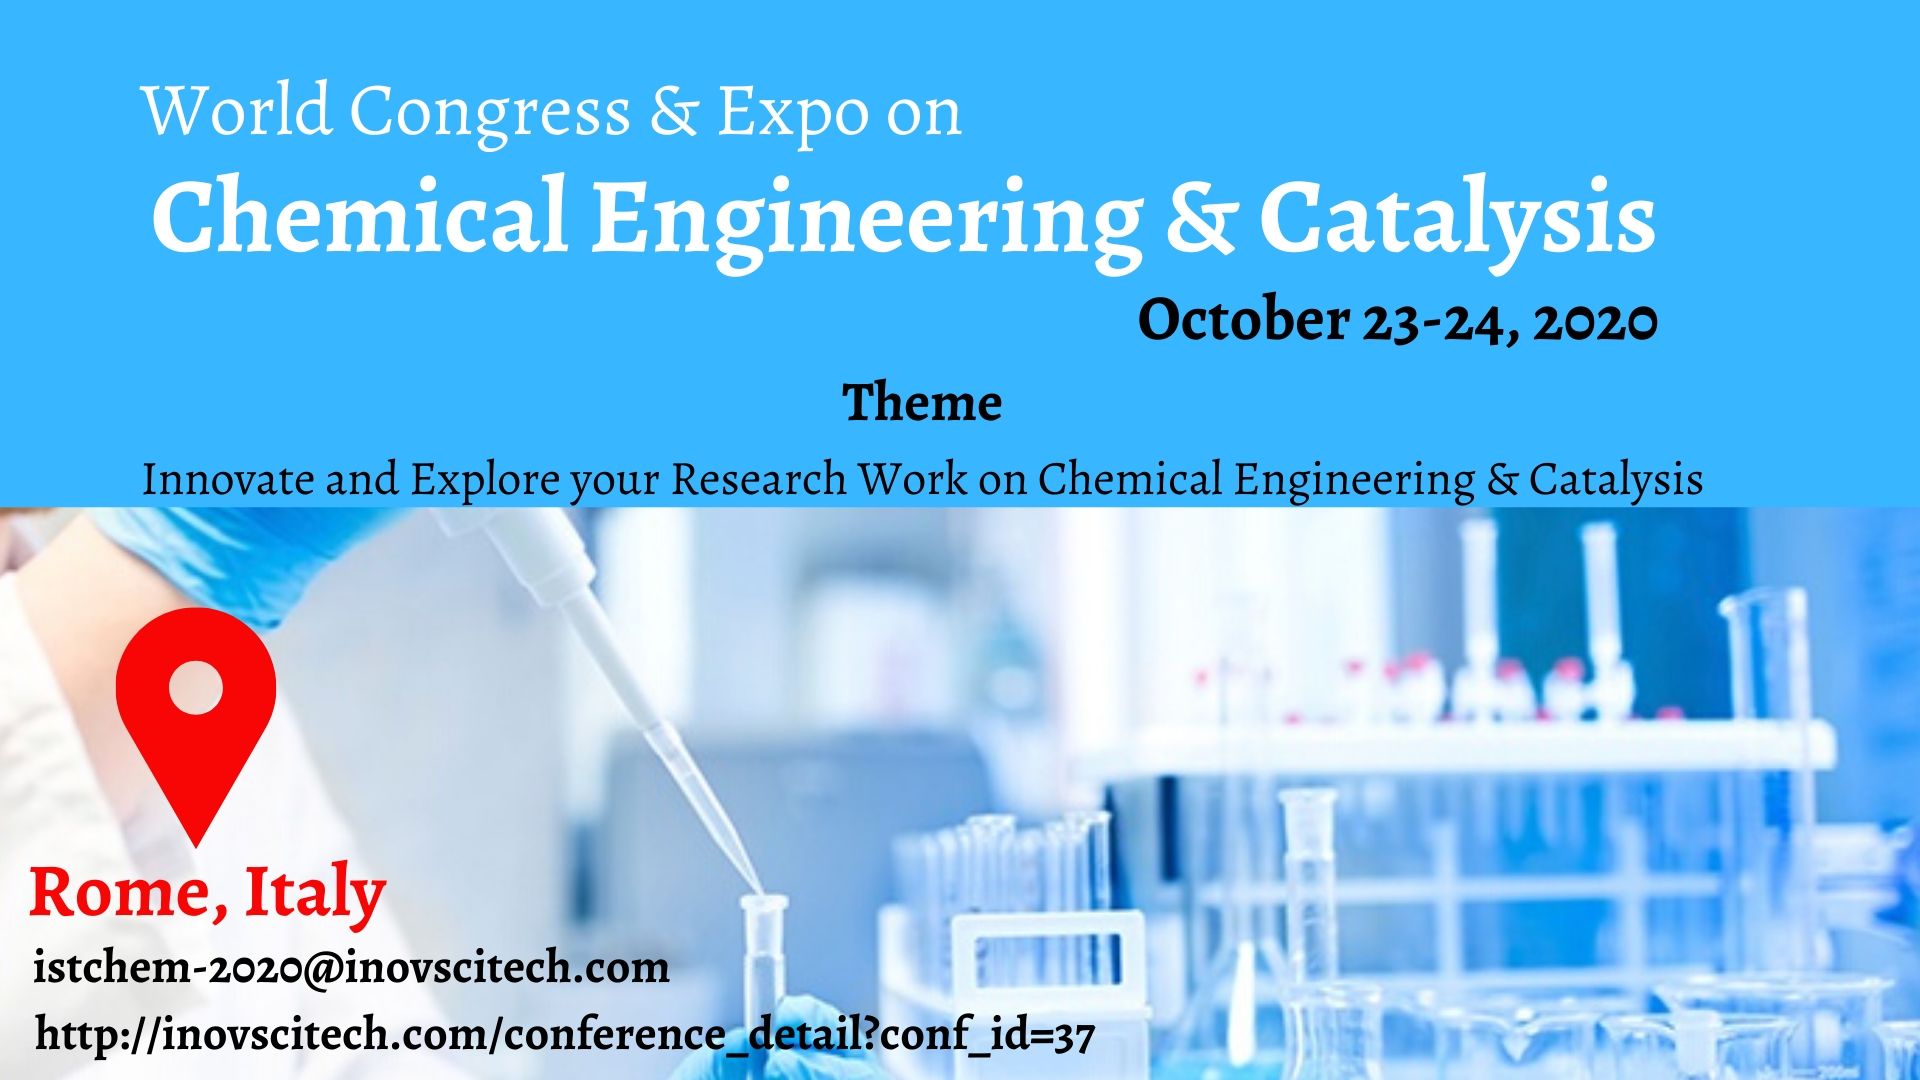 World Congress & Expo on Chemical Engineering & Catalysis, Rome, Italy, Italy